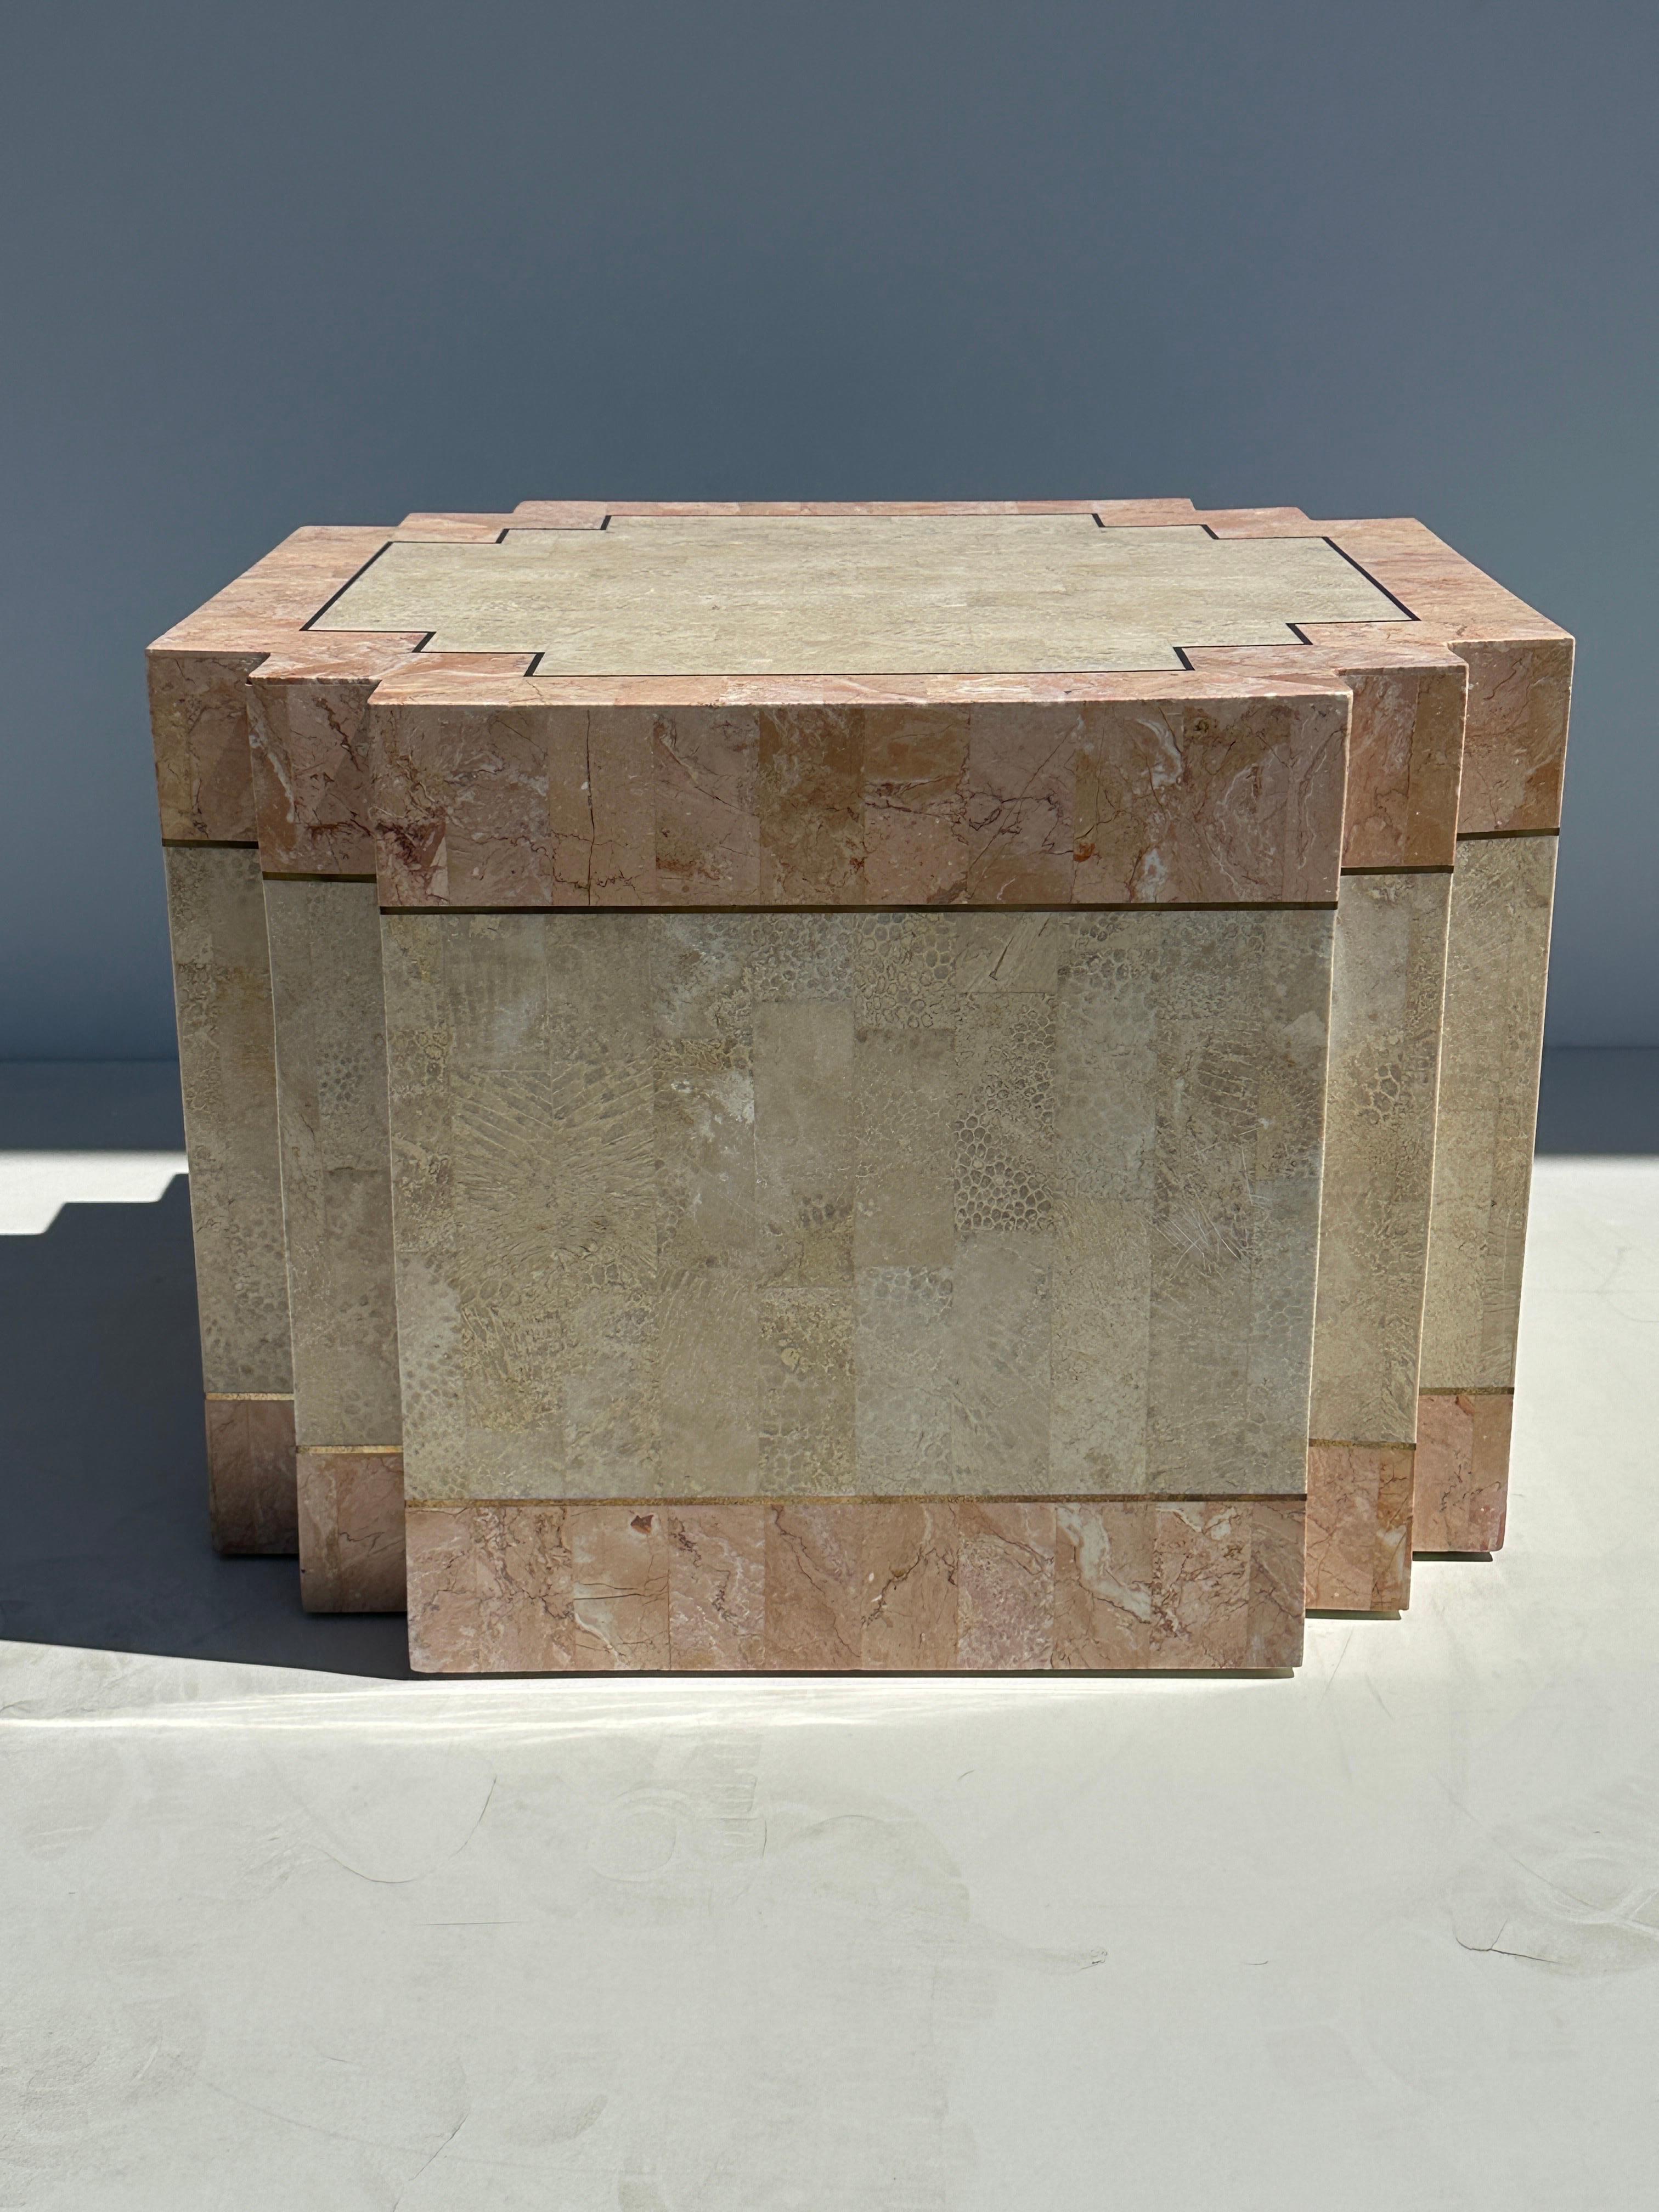 Tessellated pink stone and fossilized coral geometric coffee table base with brass accents. Can be used as is or with a glass top.
Matching side / end tables also available in our other listing.